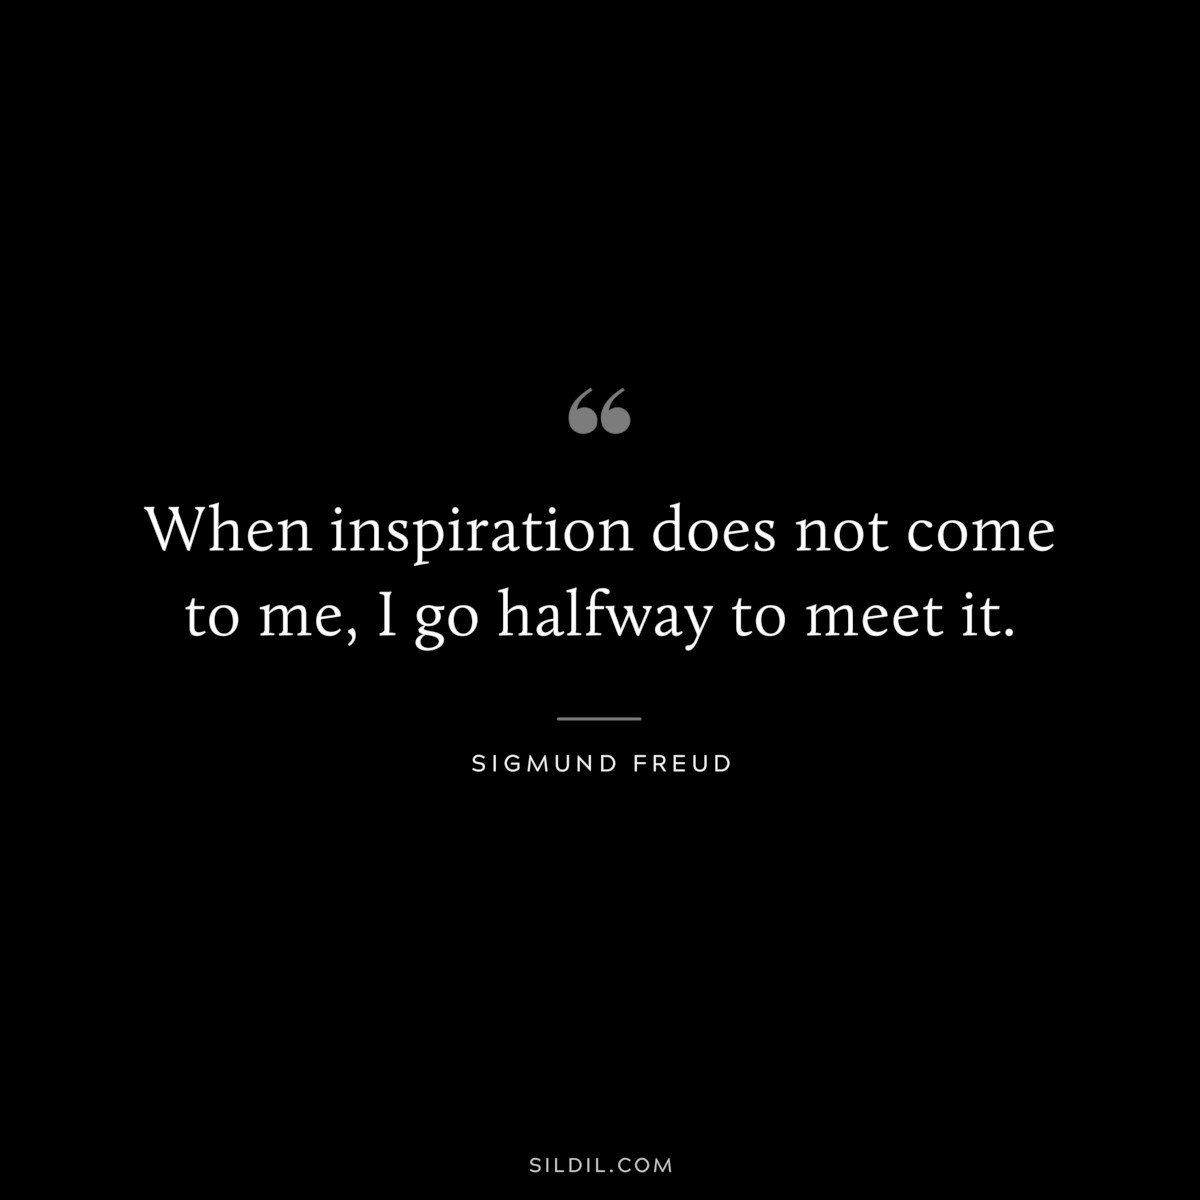 When inspiration does not come to me, I go halfway to meet it. ― Sigmund Frued